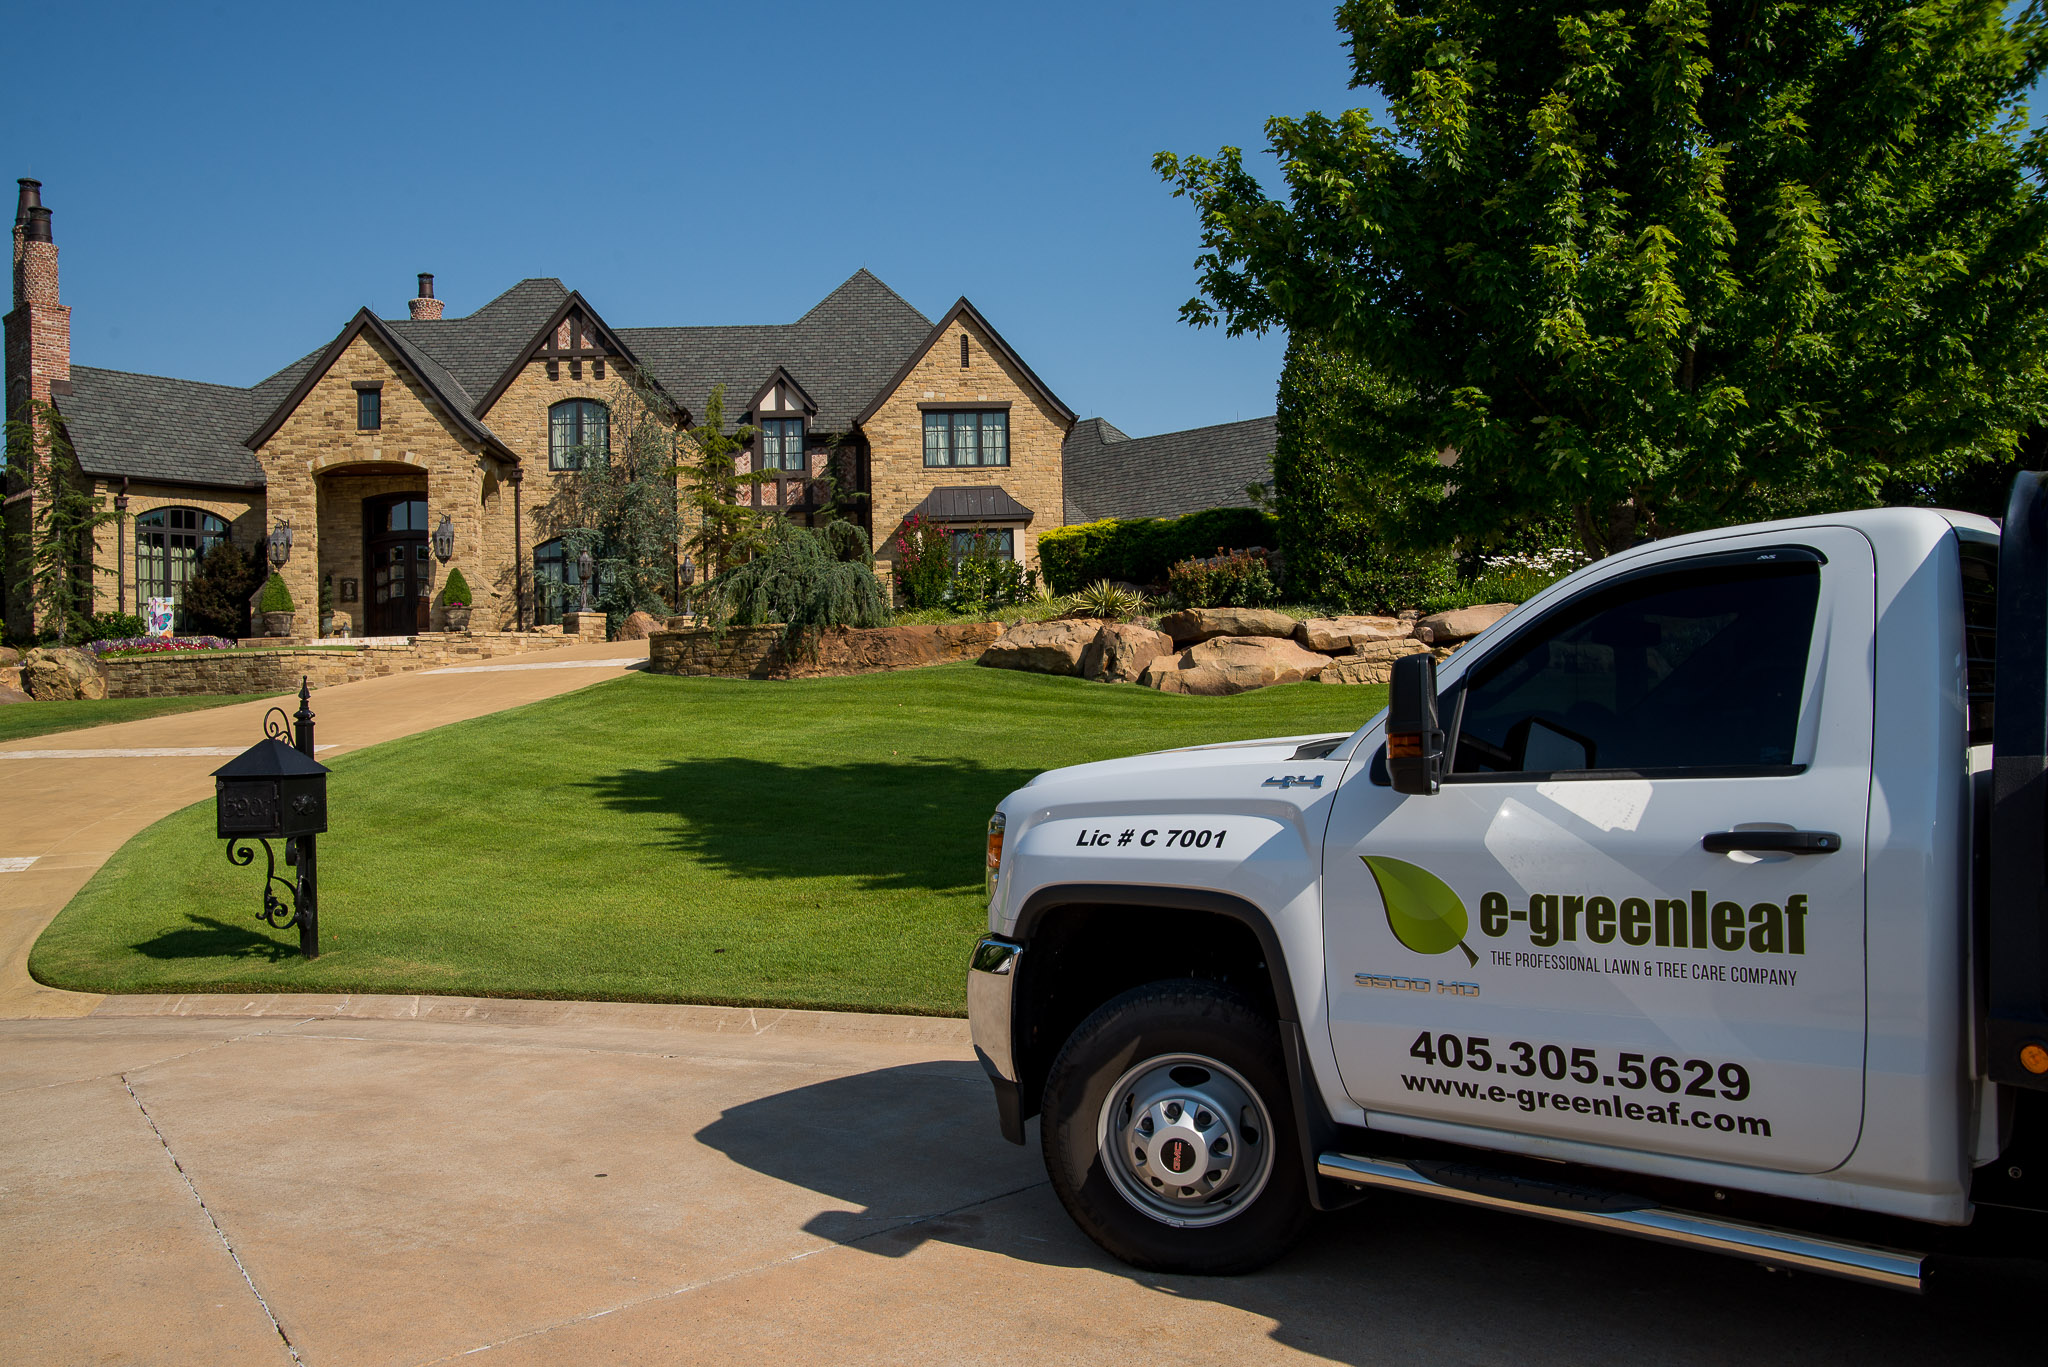 The Hurley Health project was a OKC Lawn Seeding job where we made their lawn look great.